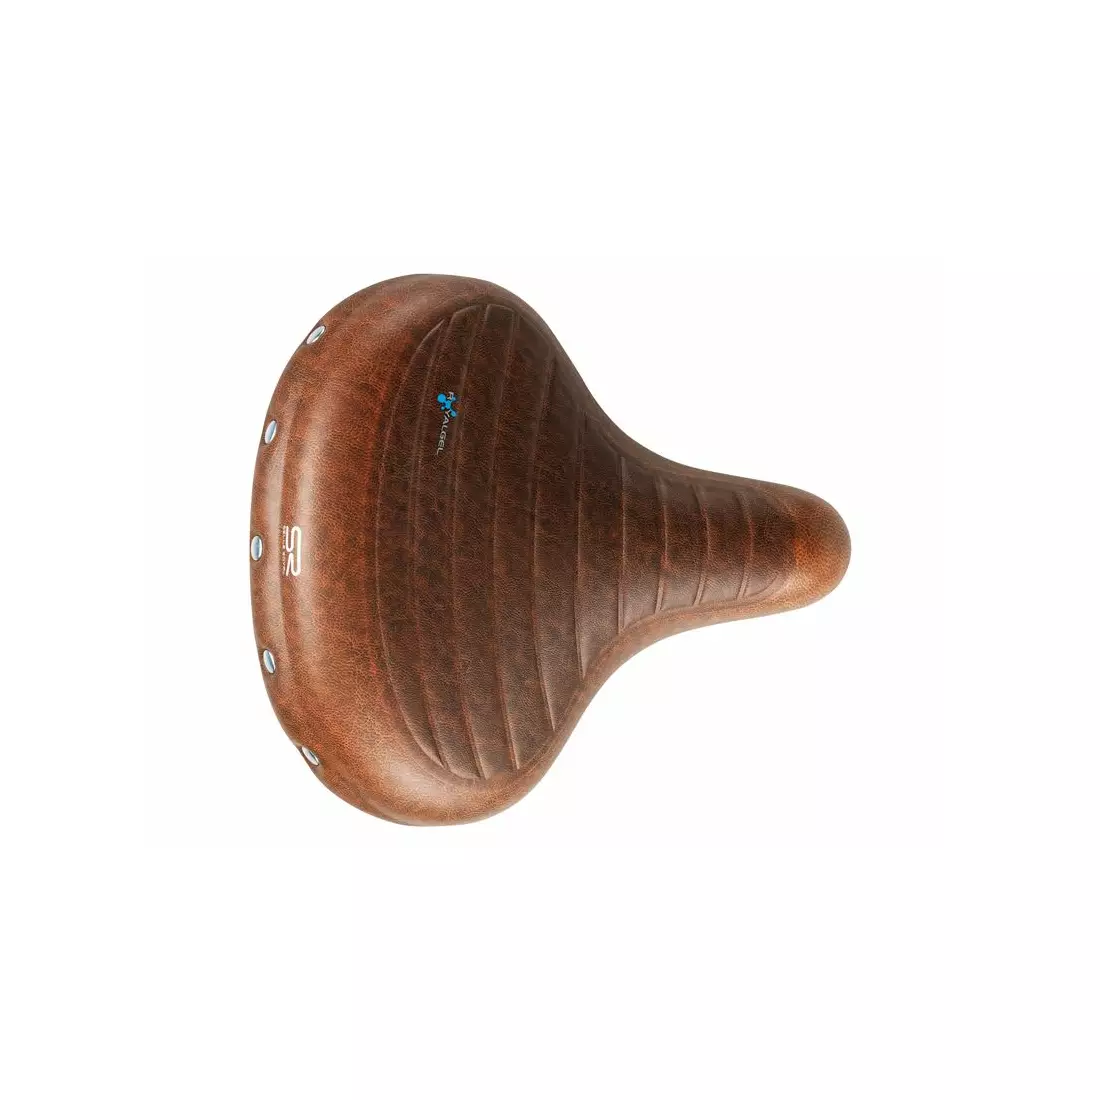 SELLEROYAL PREMIUM RELAXED bicycle saddle 90st. DRIFTER PLUS BROWN unisex gel + springs SR-5111UDTC38129